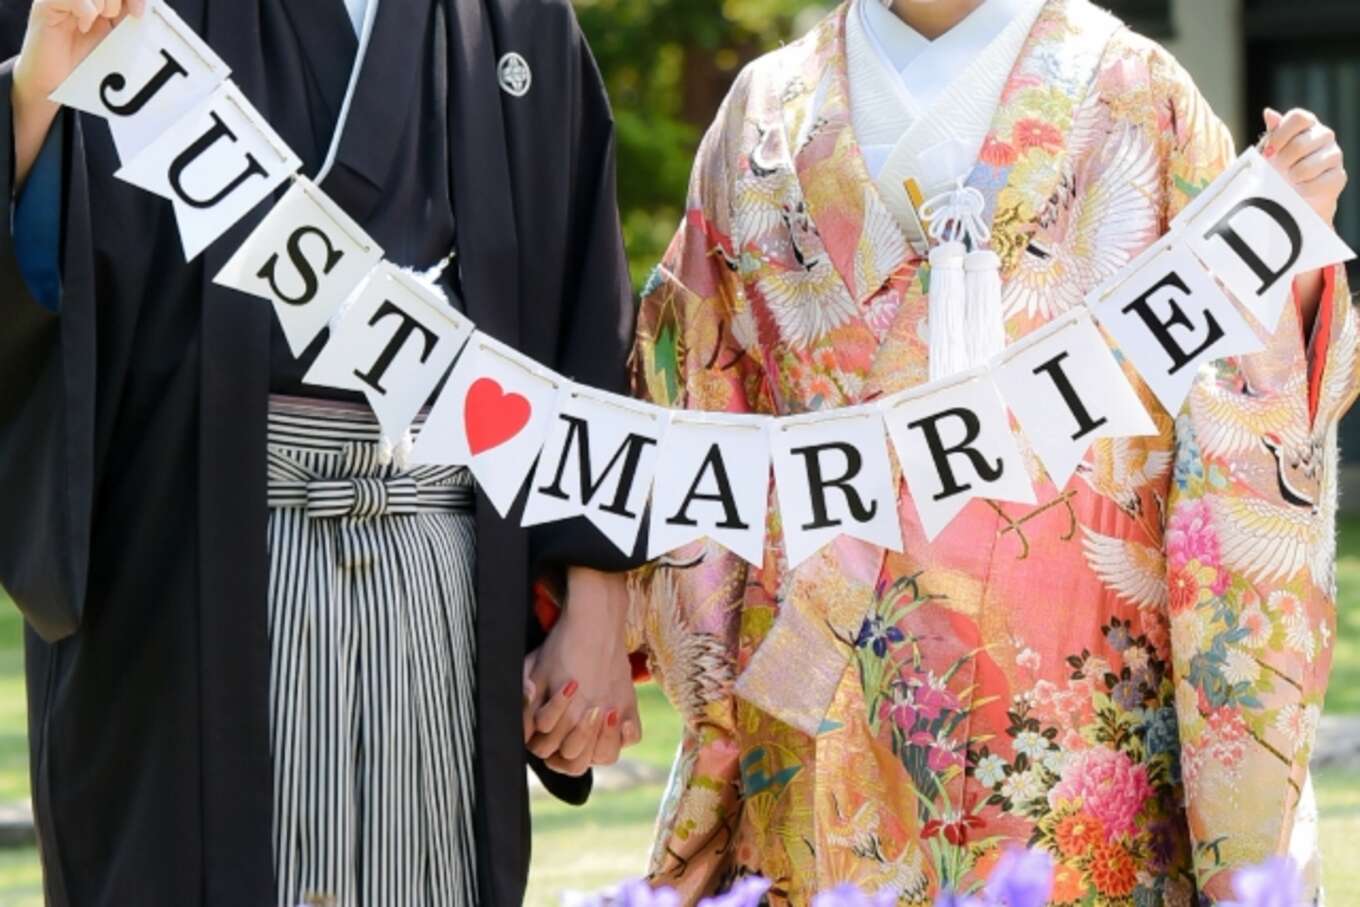 JUST MARRIEDの文字と着物の夫婦